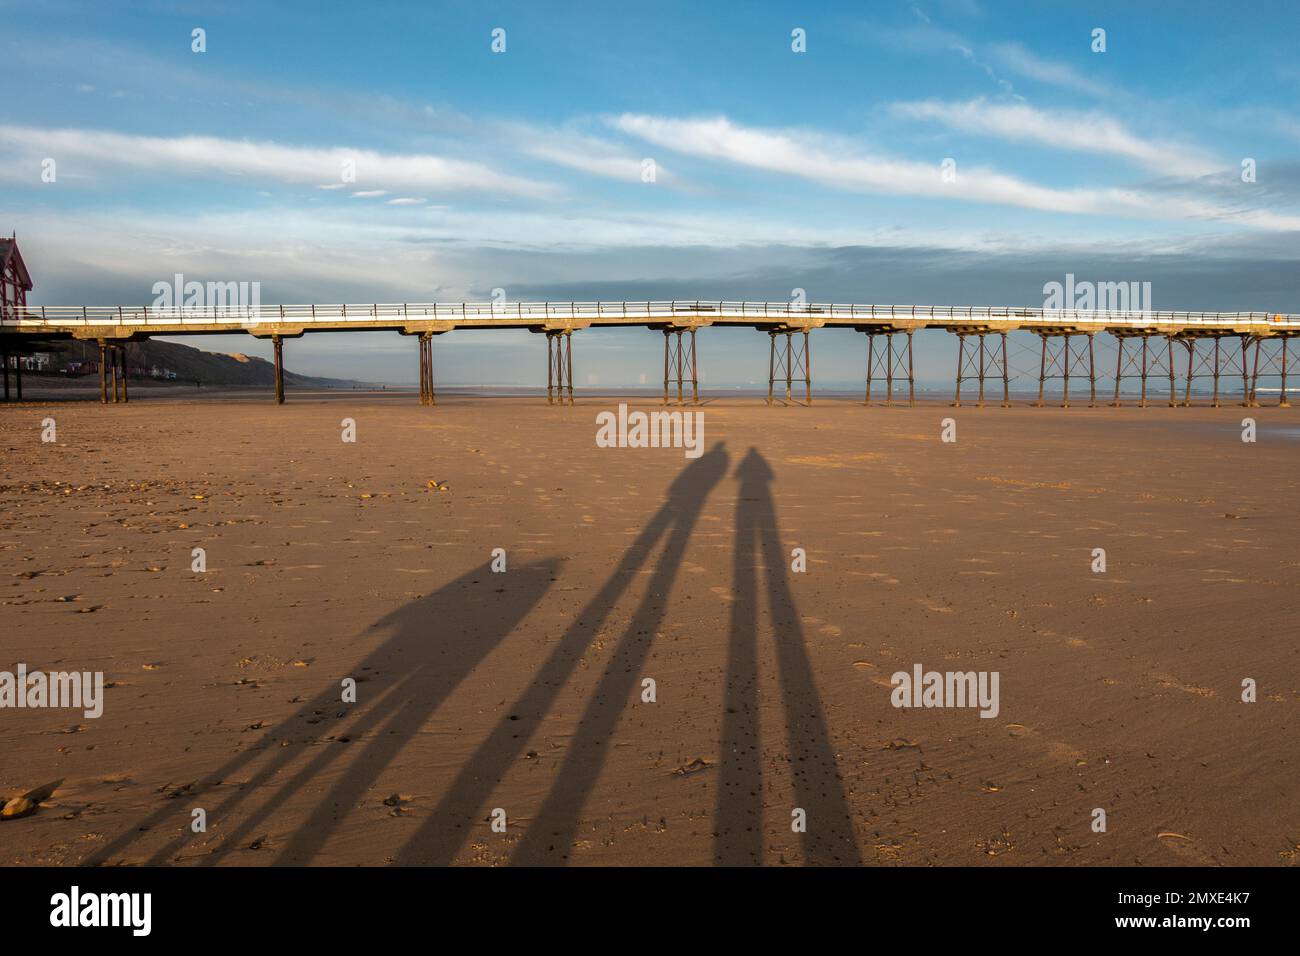 Family shadow selfie with dog at Saltburn-by-the-Sea with the pier and wide sandy beach under blue skies and sunshine. North Yorkshire, UK Stock Photo